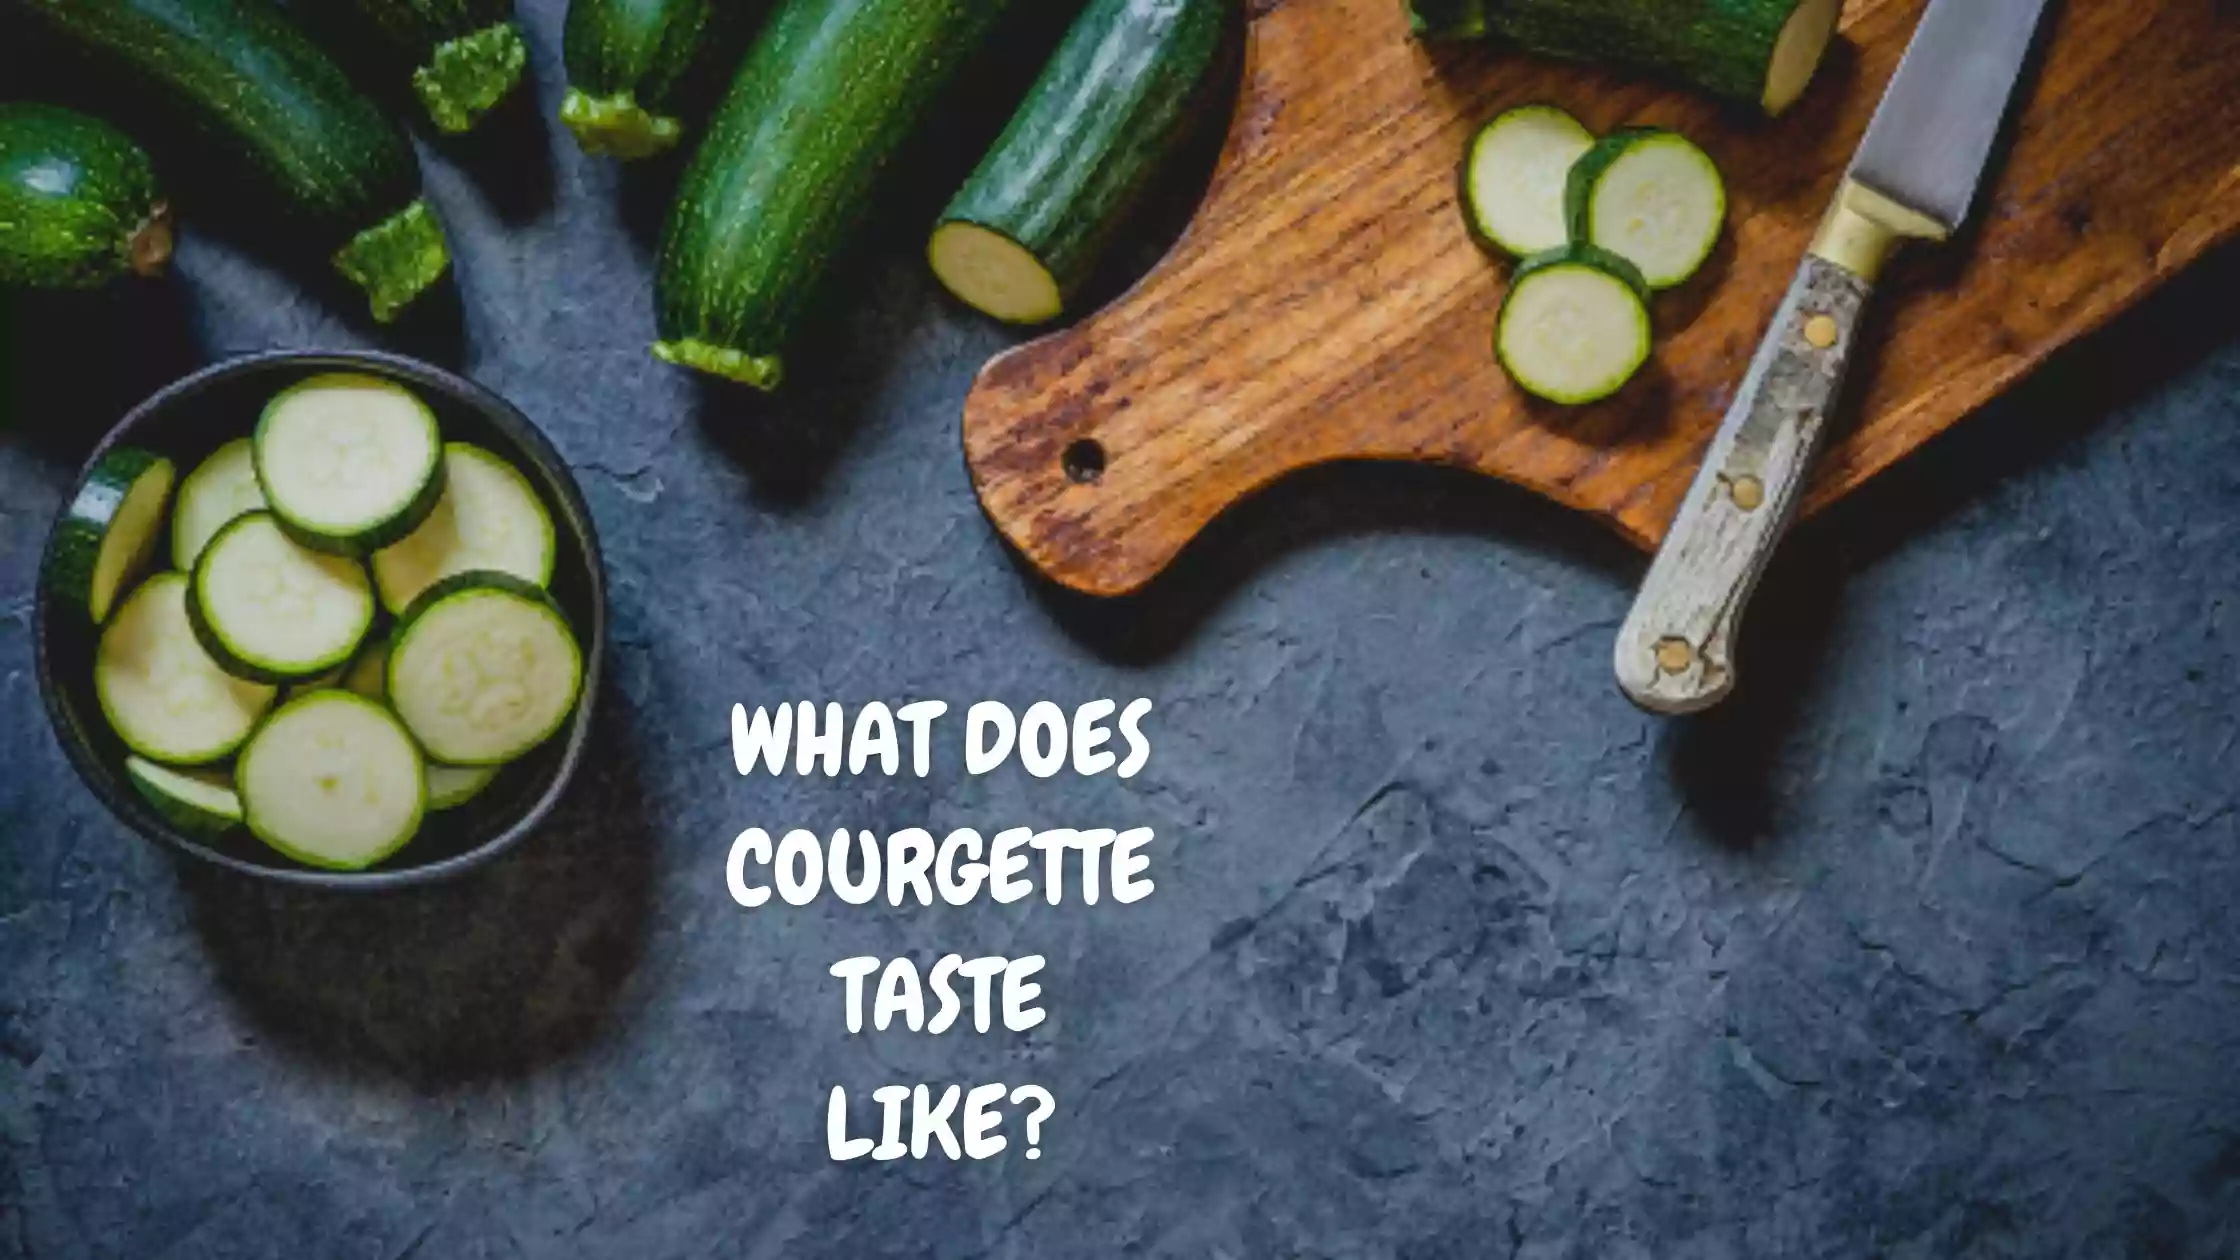 WHAT DOES COURGETTE TASTE LIKE?